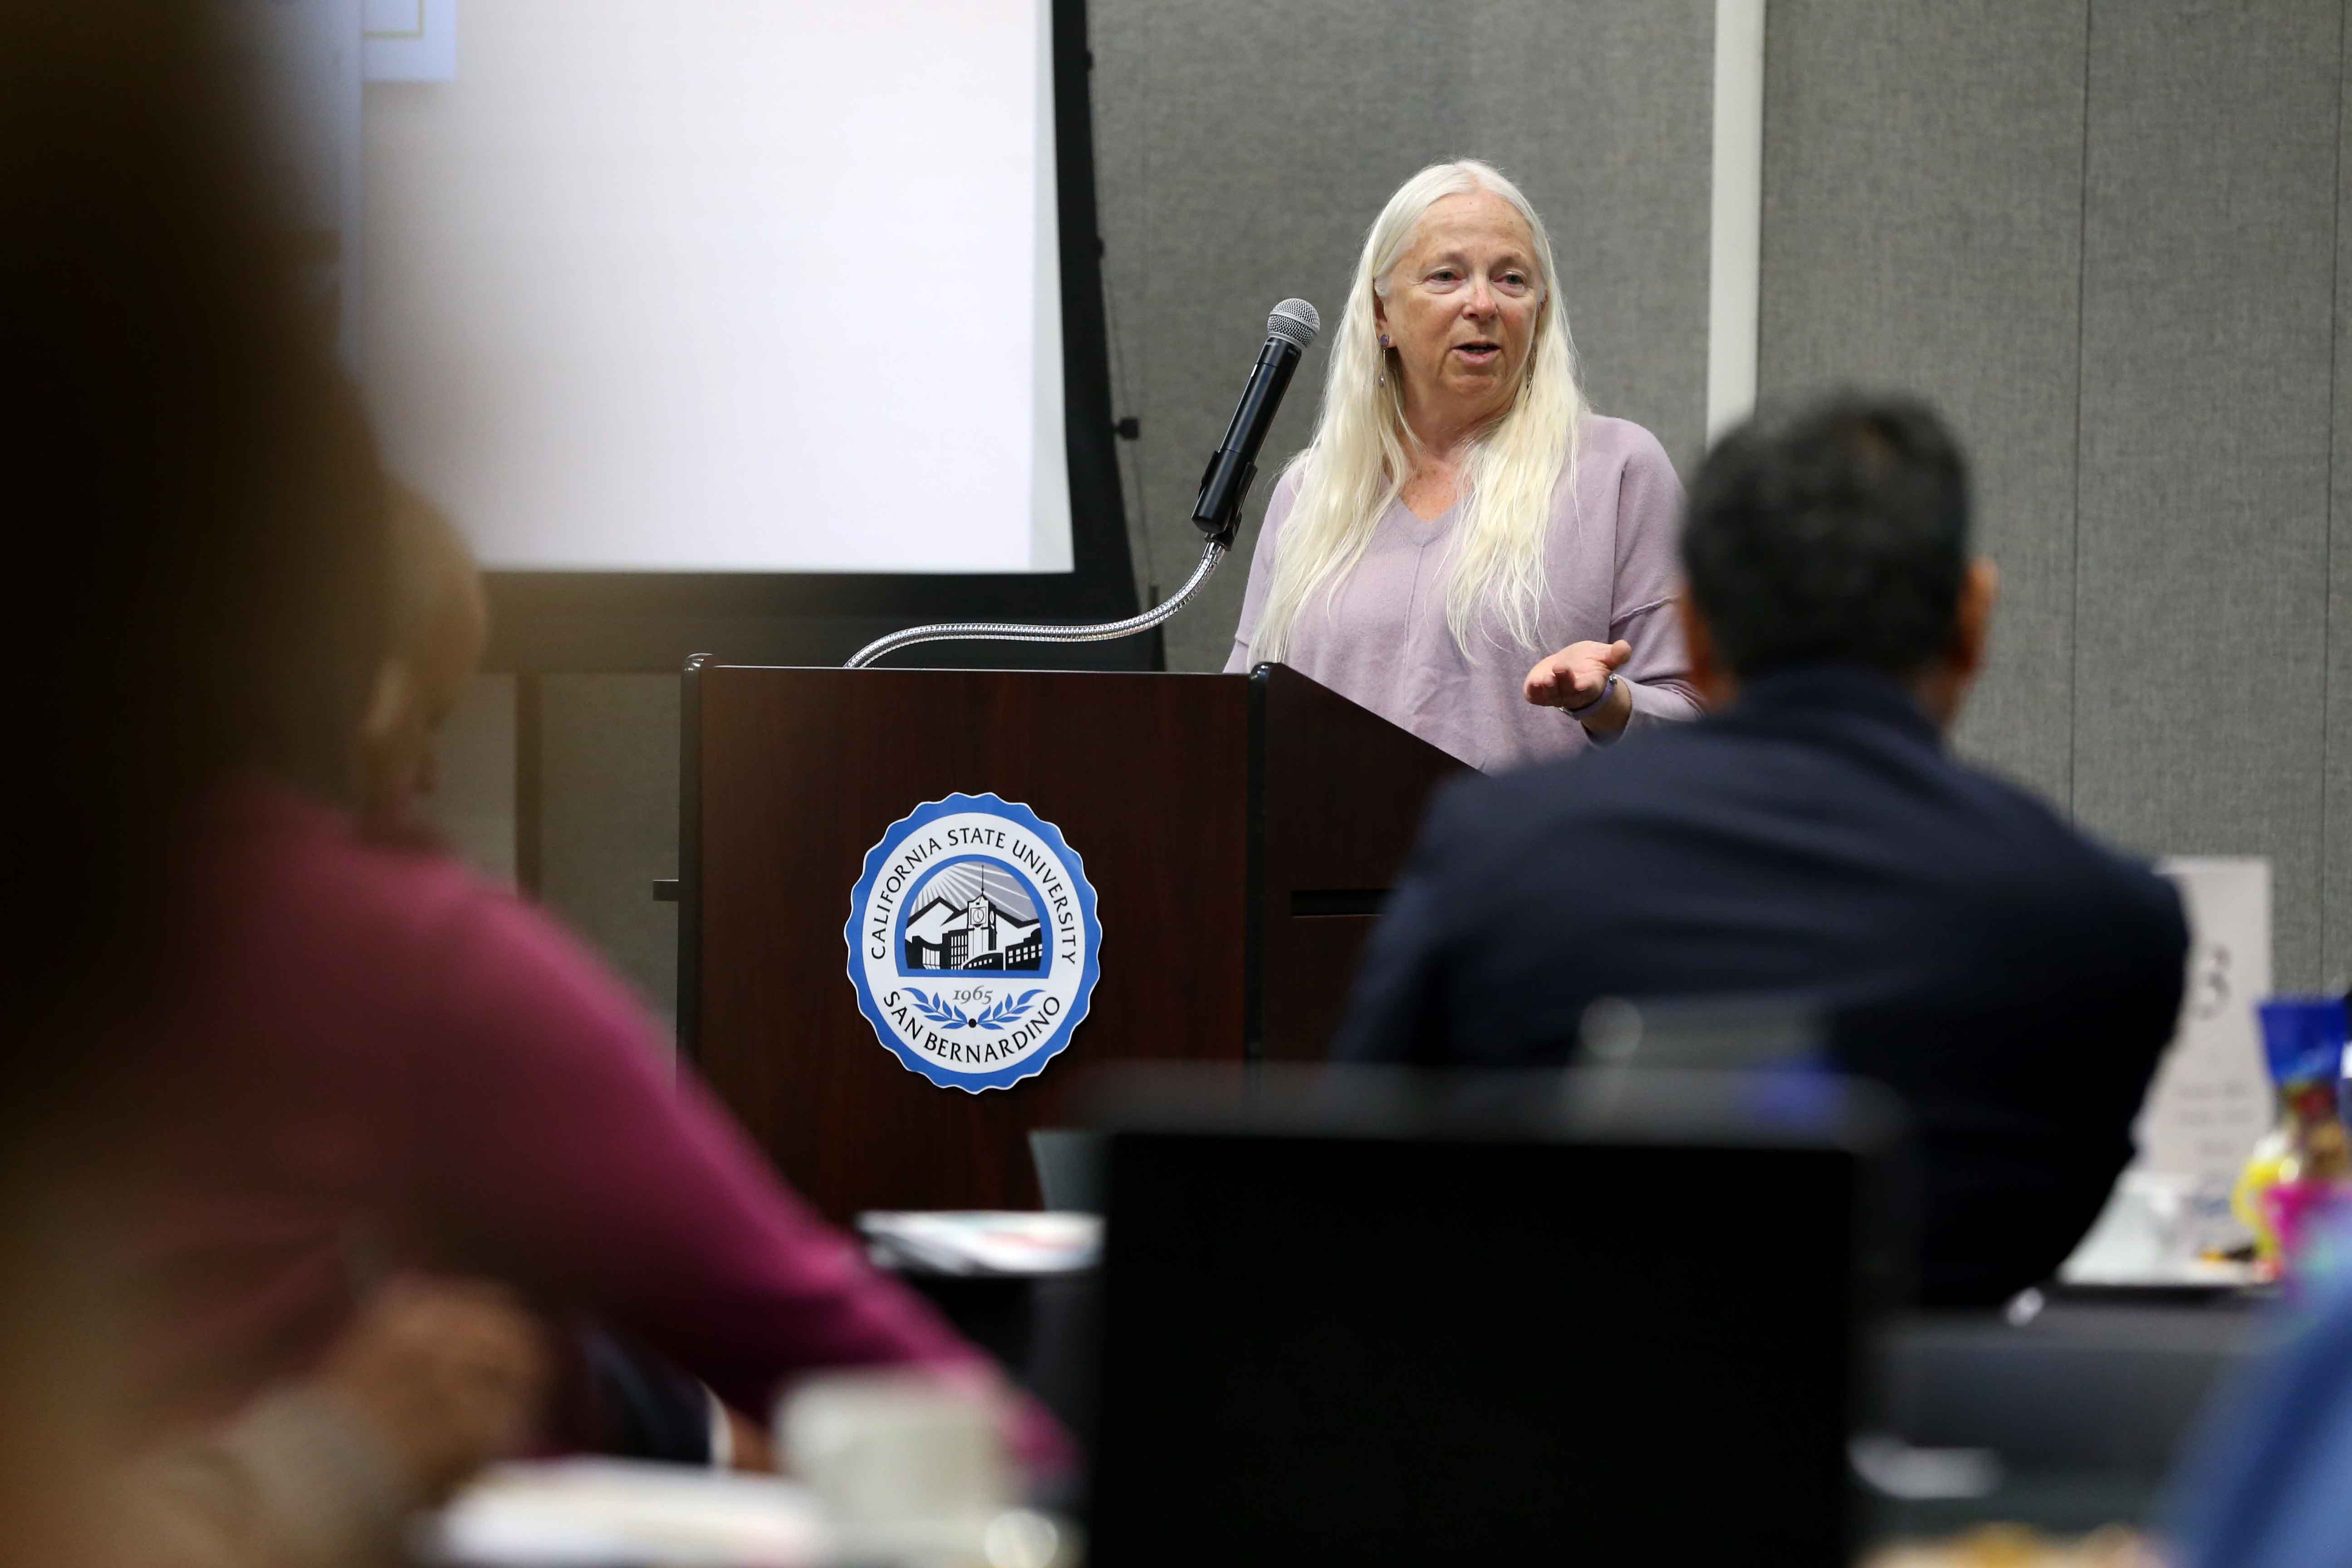 Karen Kolehmainen, a professor of physics and chair of the CSUSB faculty senate, also welcomed the group, reminding faculty members what brought them to the university.